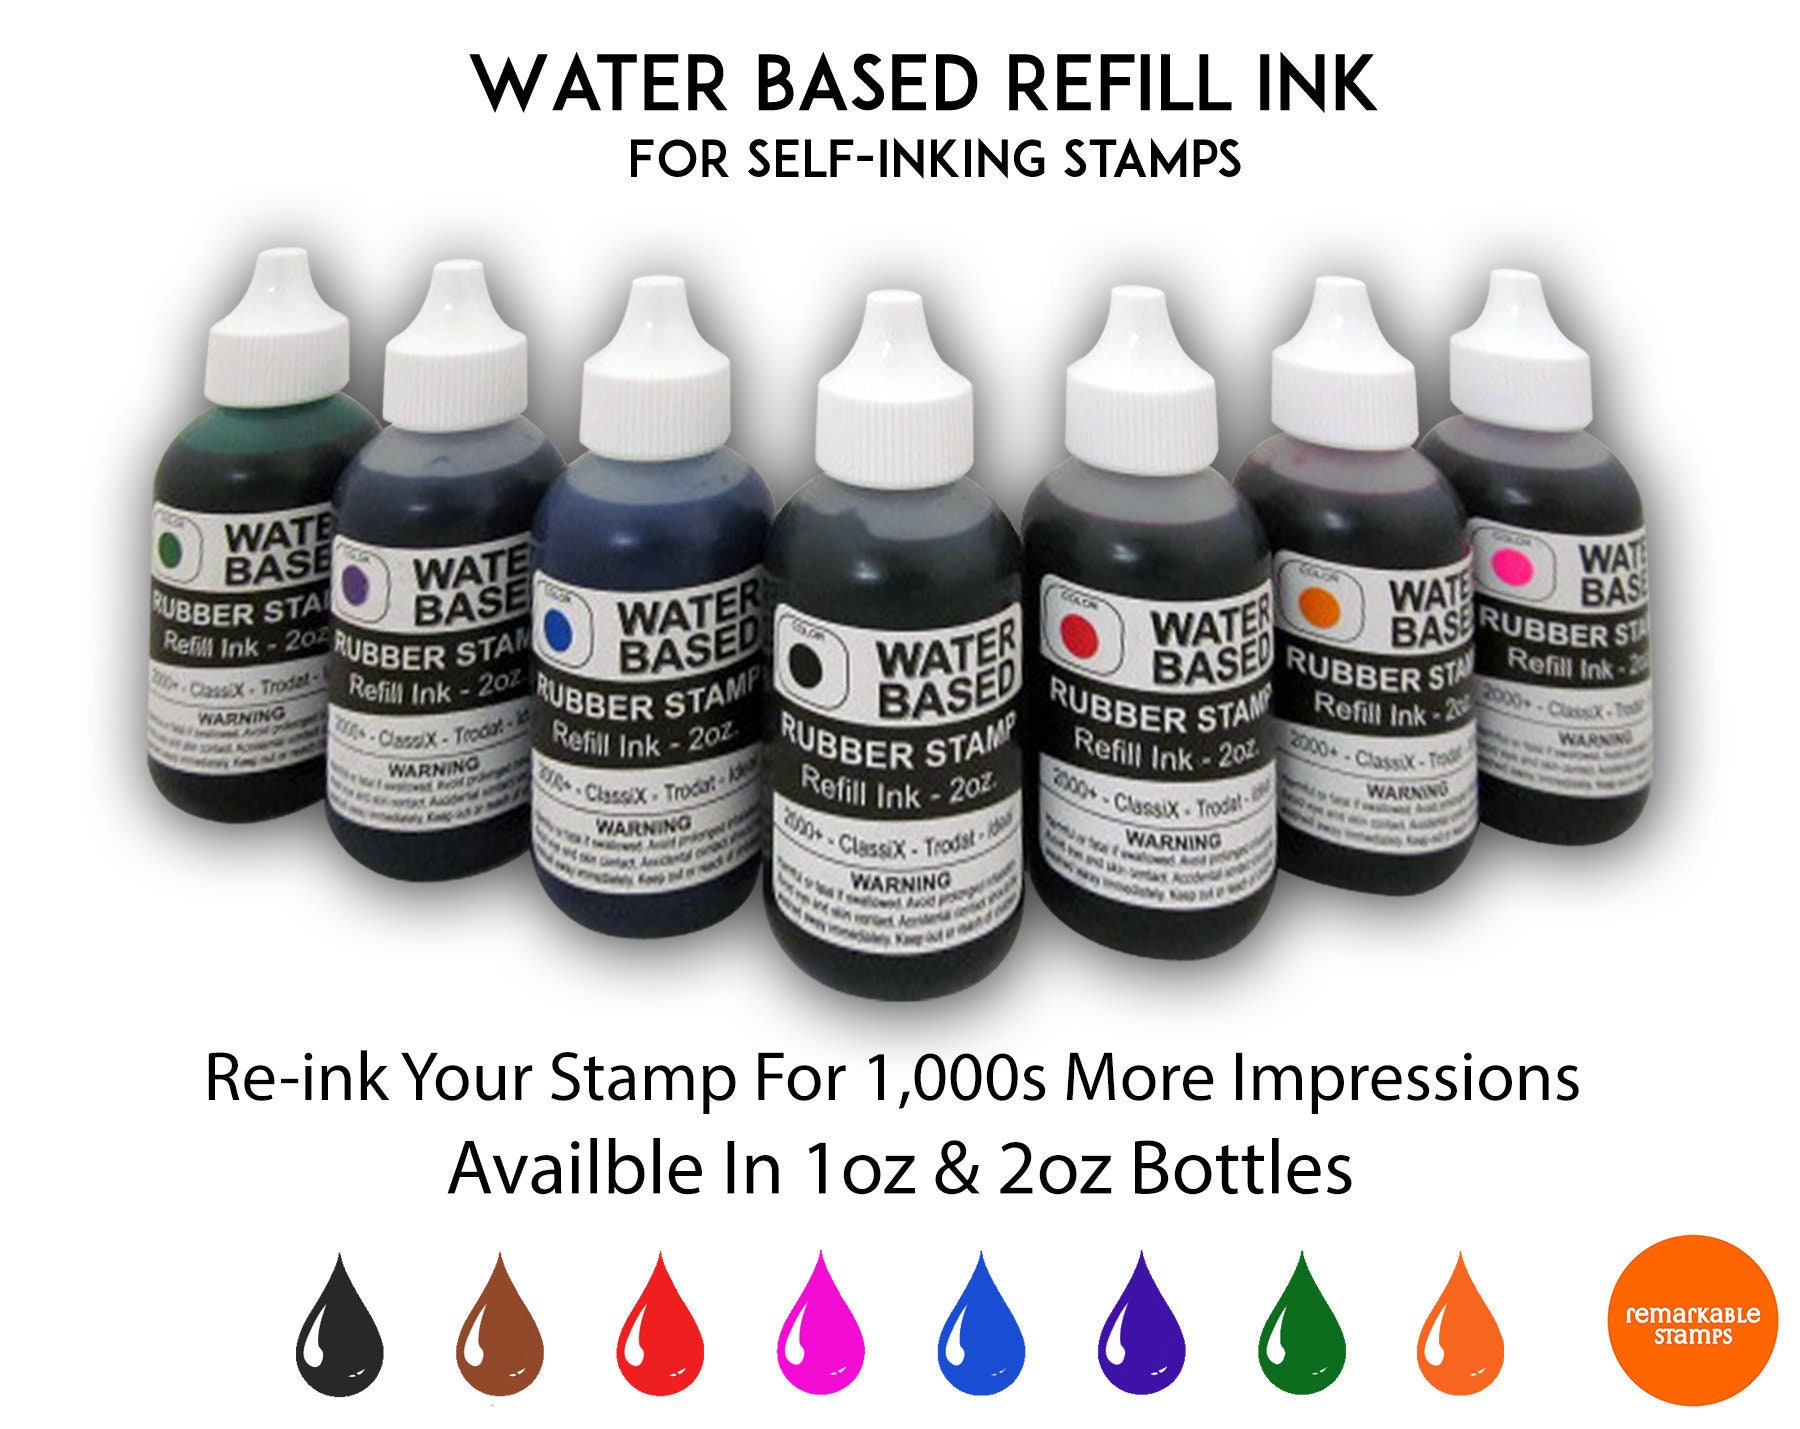 4 Oz Rubber Stamp Ink Felt/Self-Inking Pad Refill